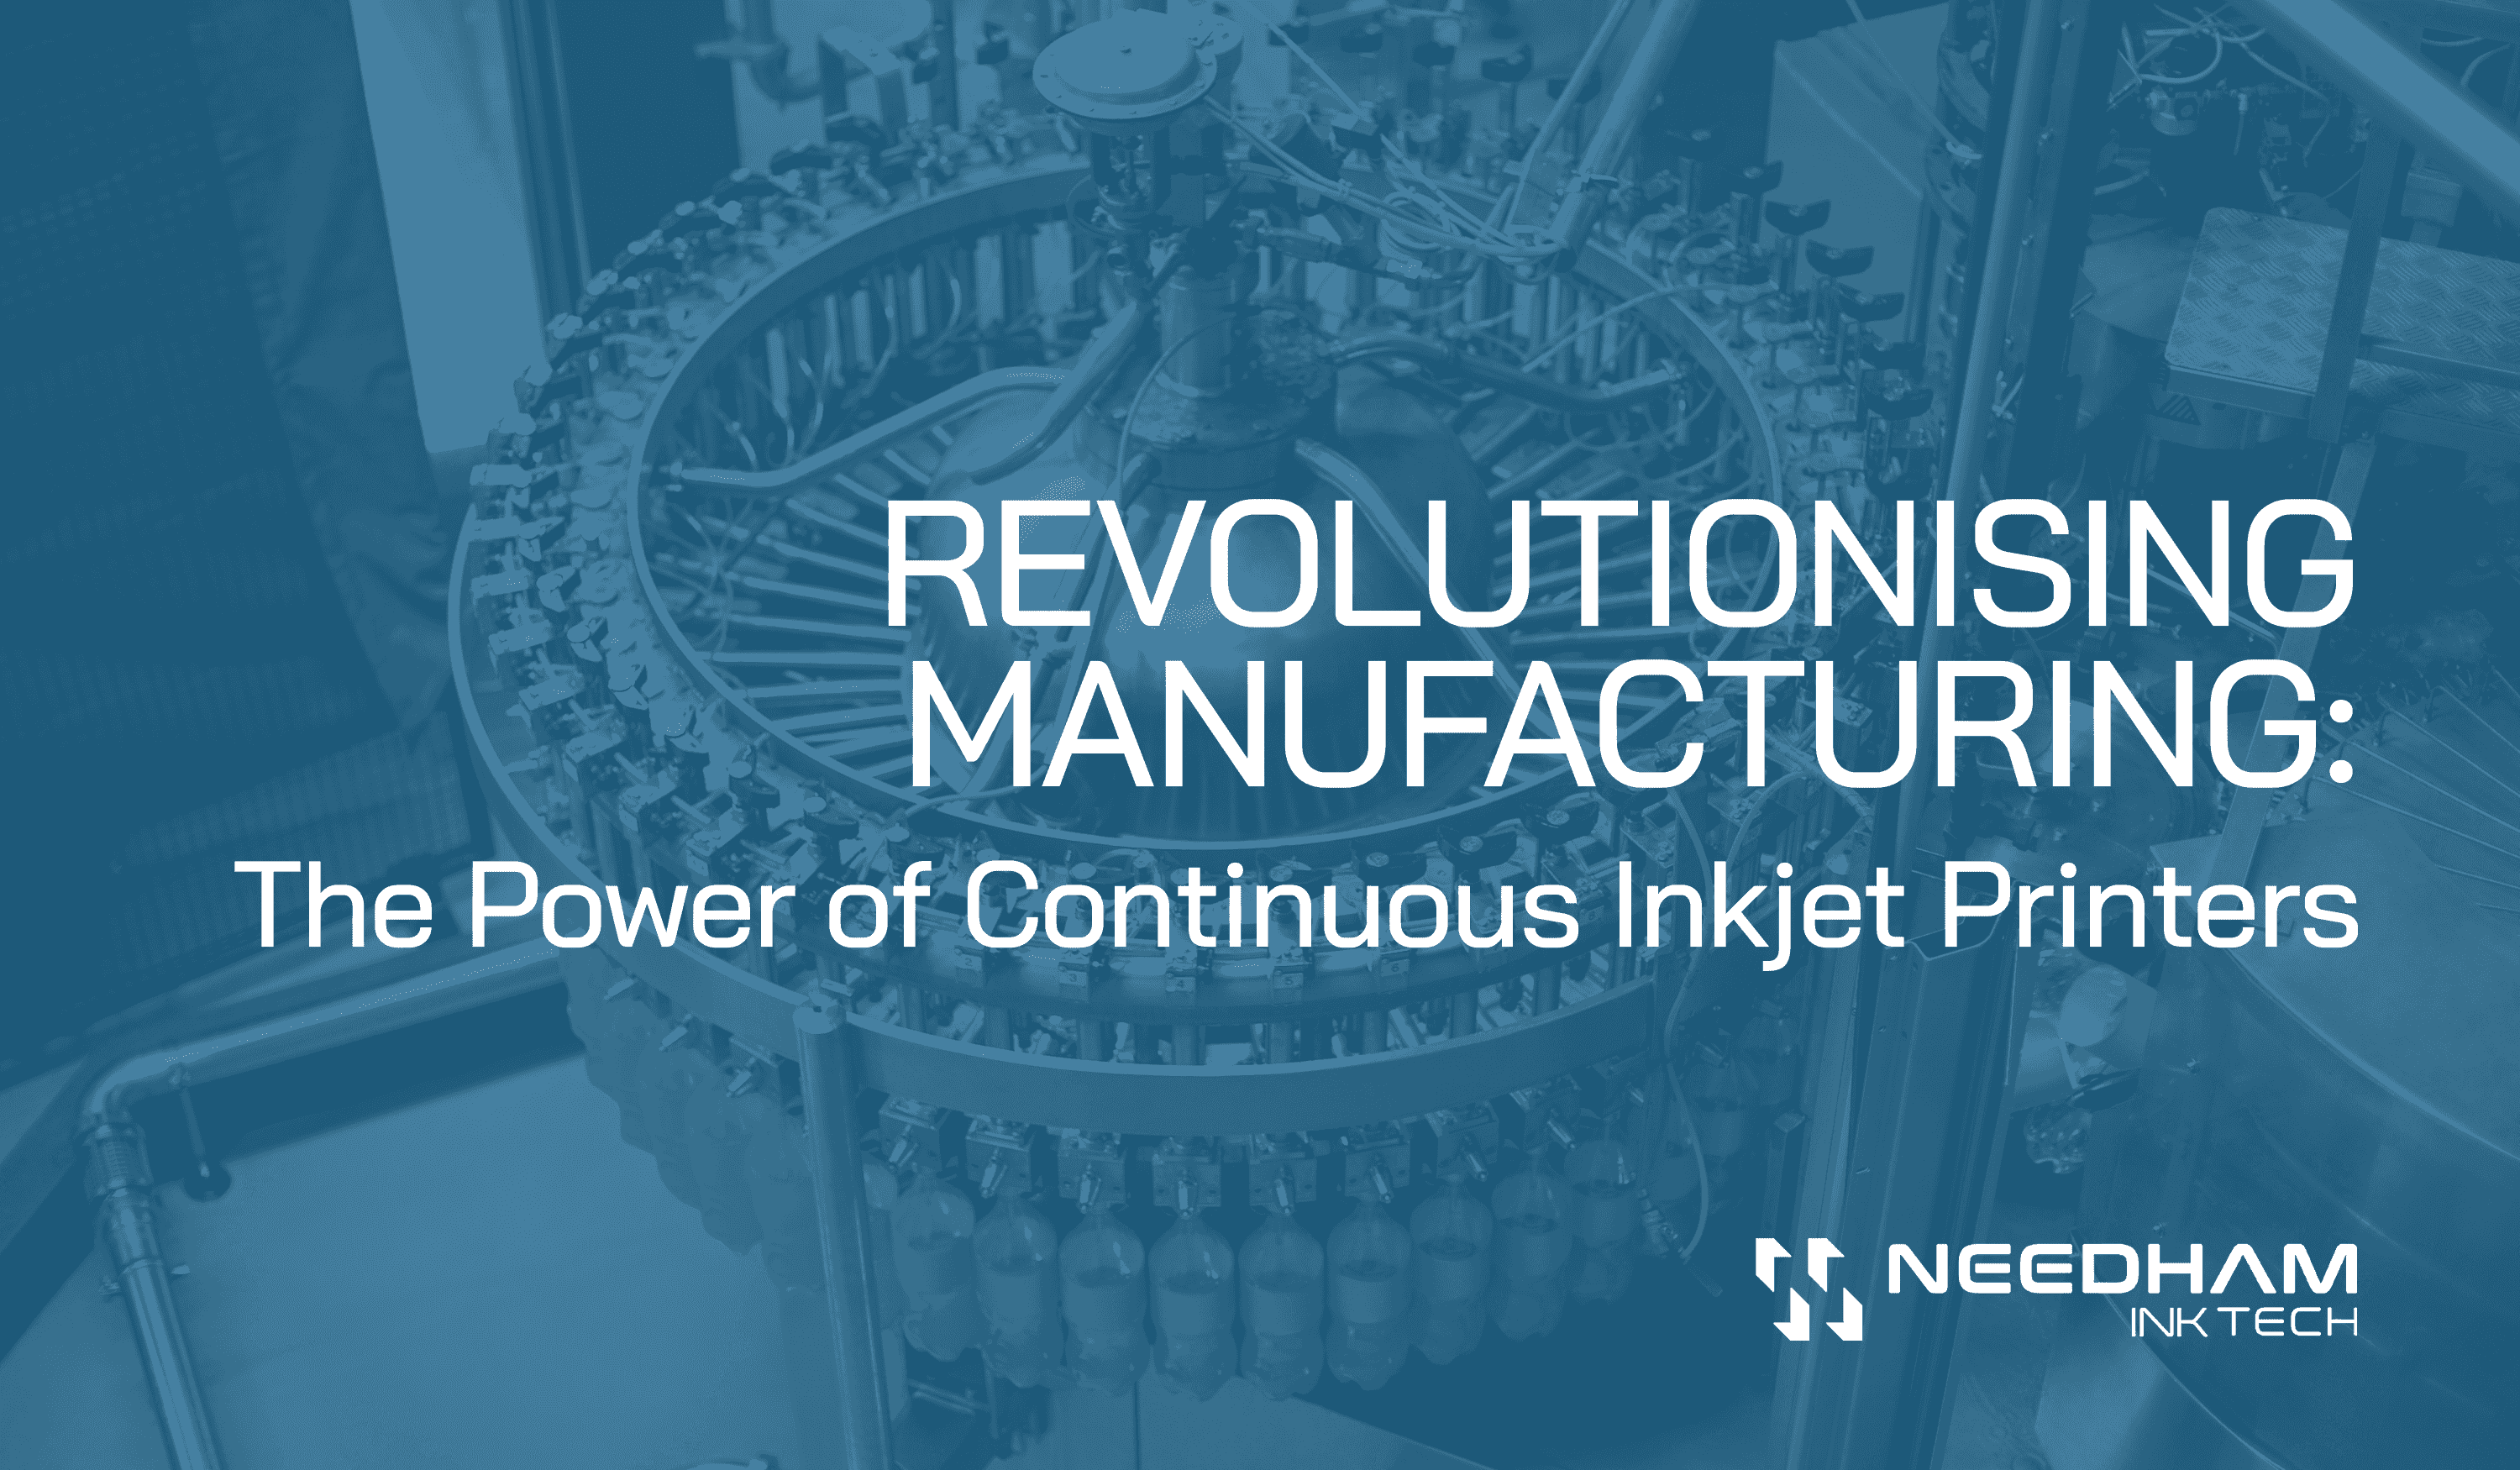 Revolutionising Manufacturing: The Power of Continuous Inkjet Printers